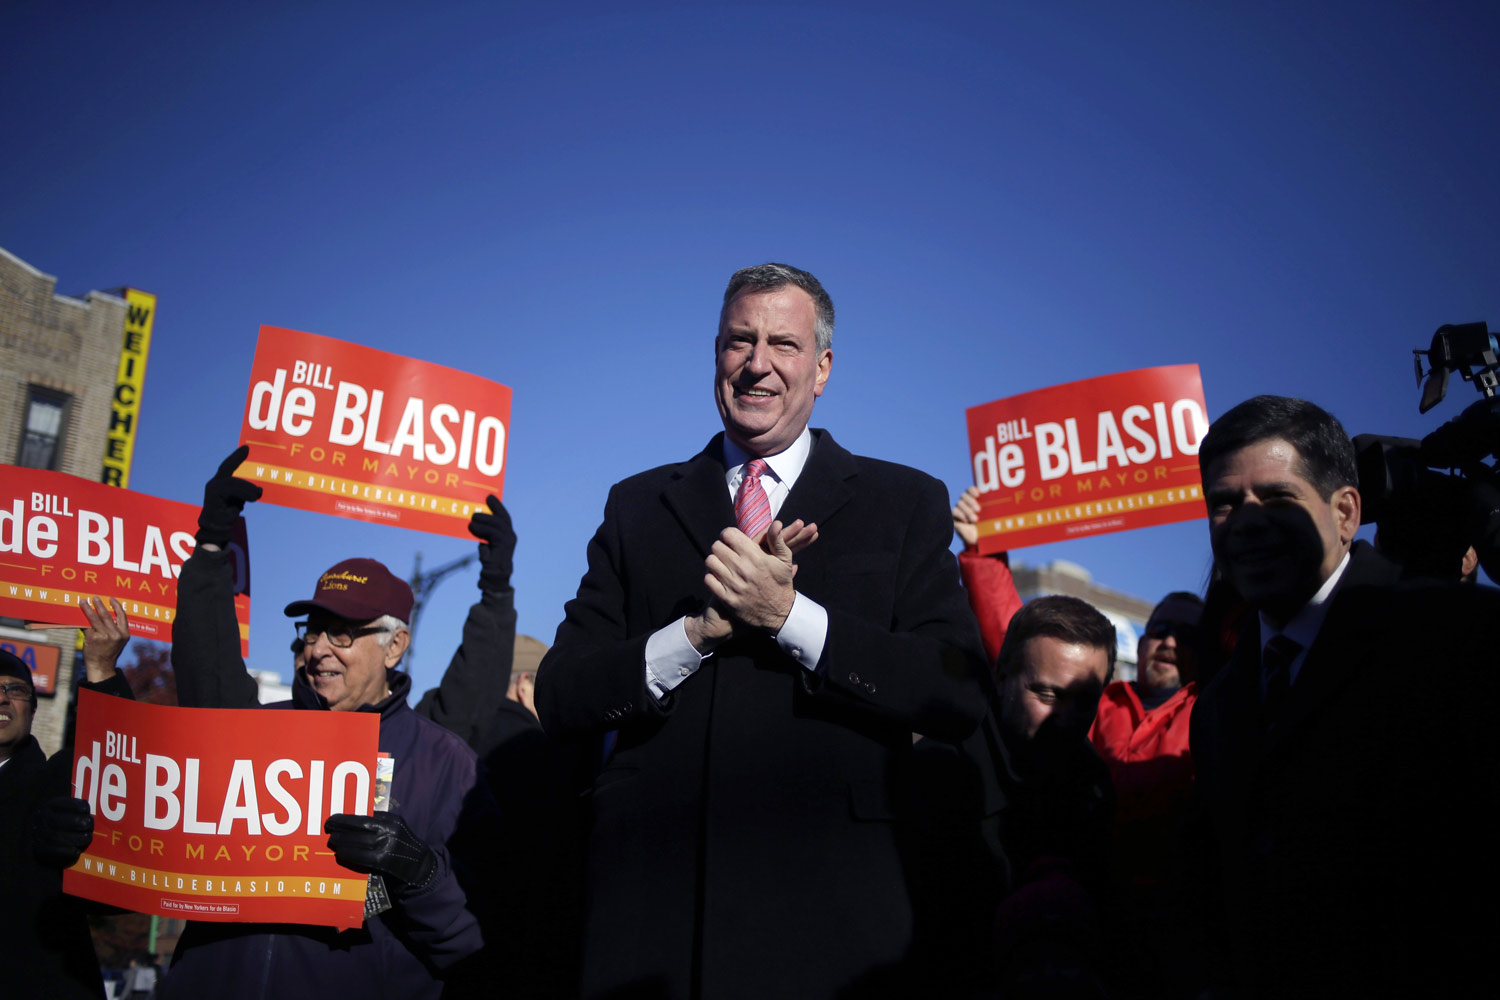 De Blasio in New York: If You Can Do It Here